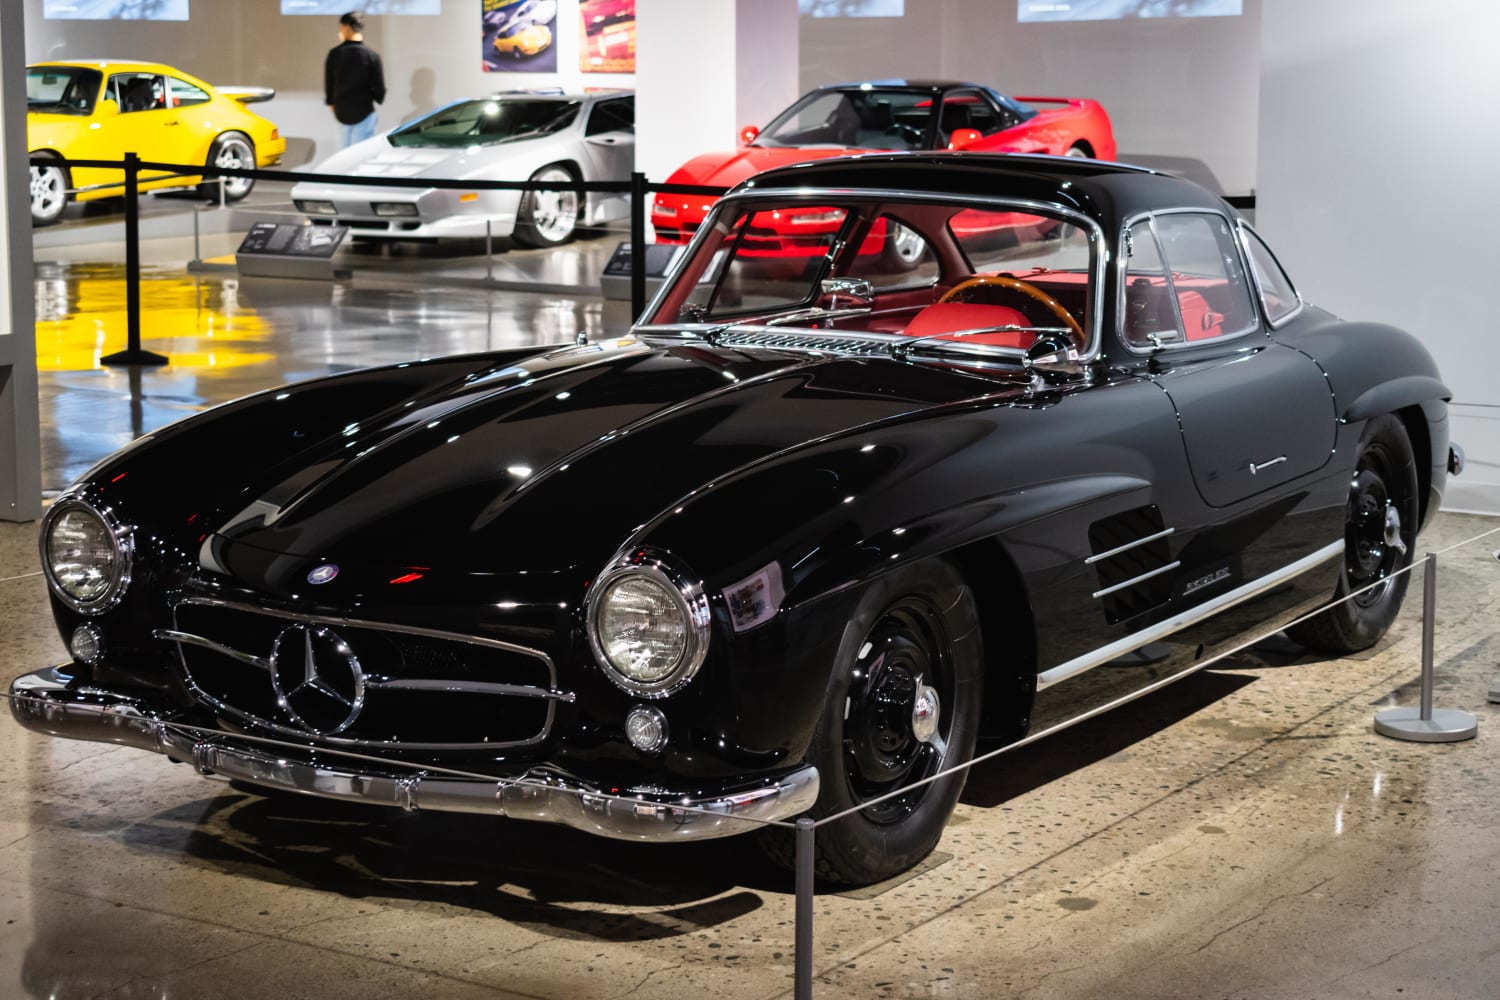 What a beautiful peice of history. 1956 Mercedes 300SL